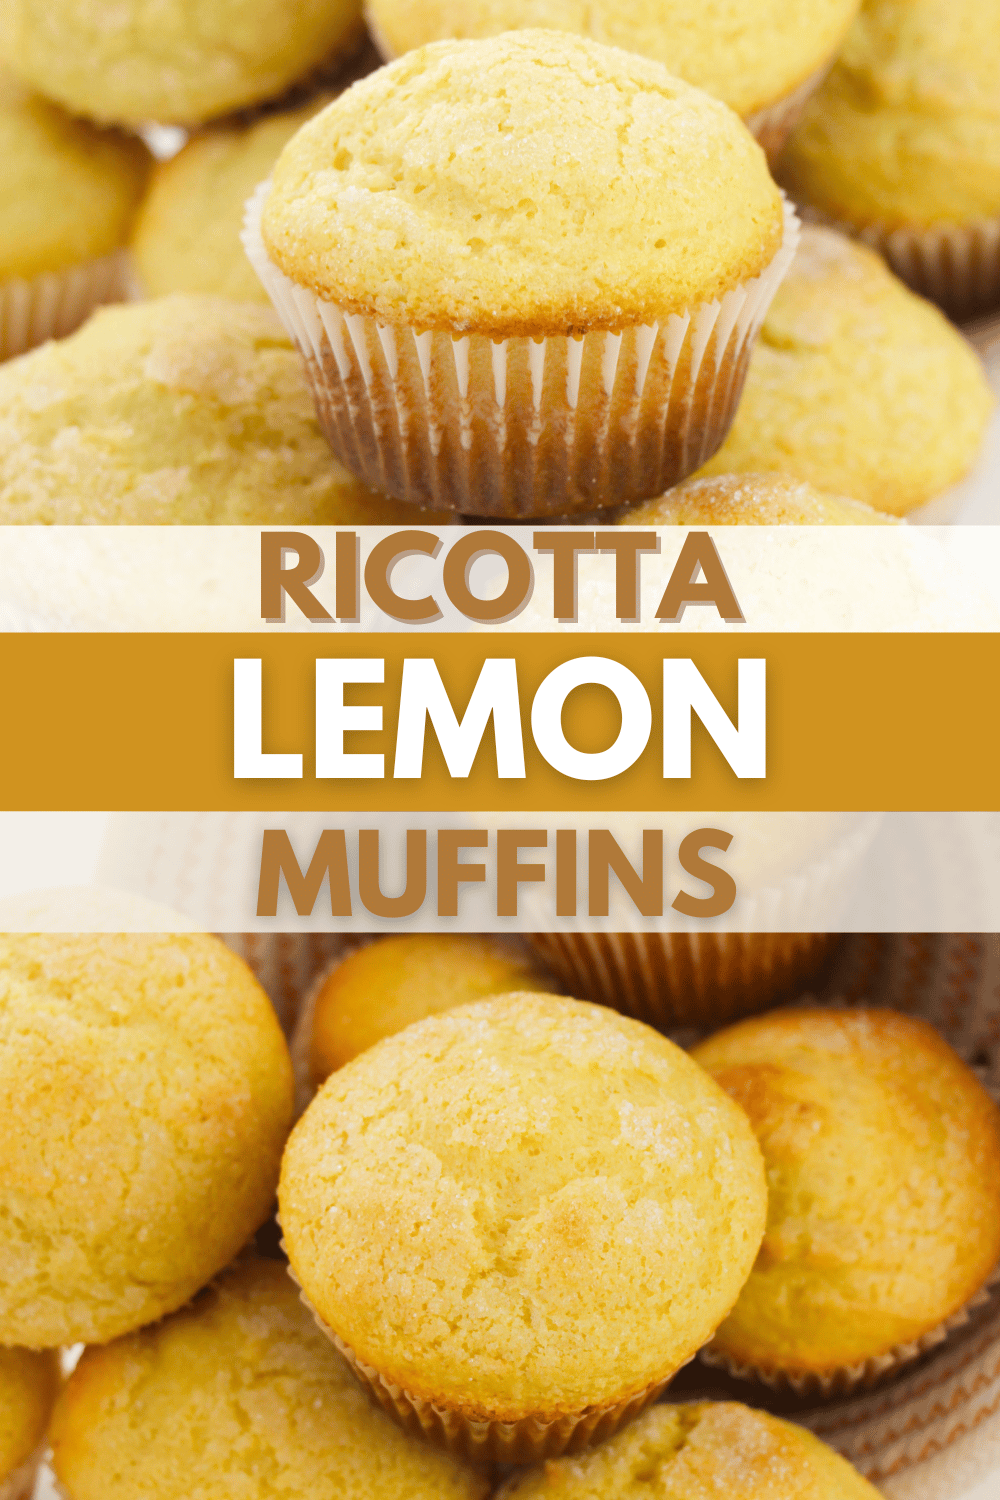 These Ricotta Lemon Muffins are super moist, fluffy, and packed with flavor! They're the perfect way to start off a summer morning. #ricottalemonmuffins #lemonmuffins #breakfastmuffins #recipe via @wondermomwannab